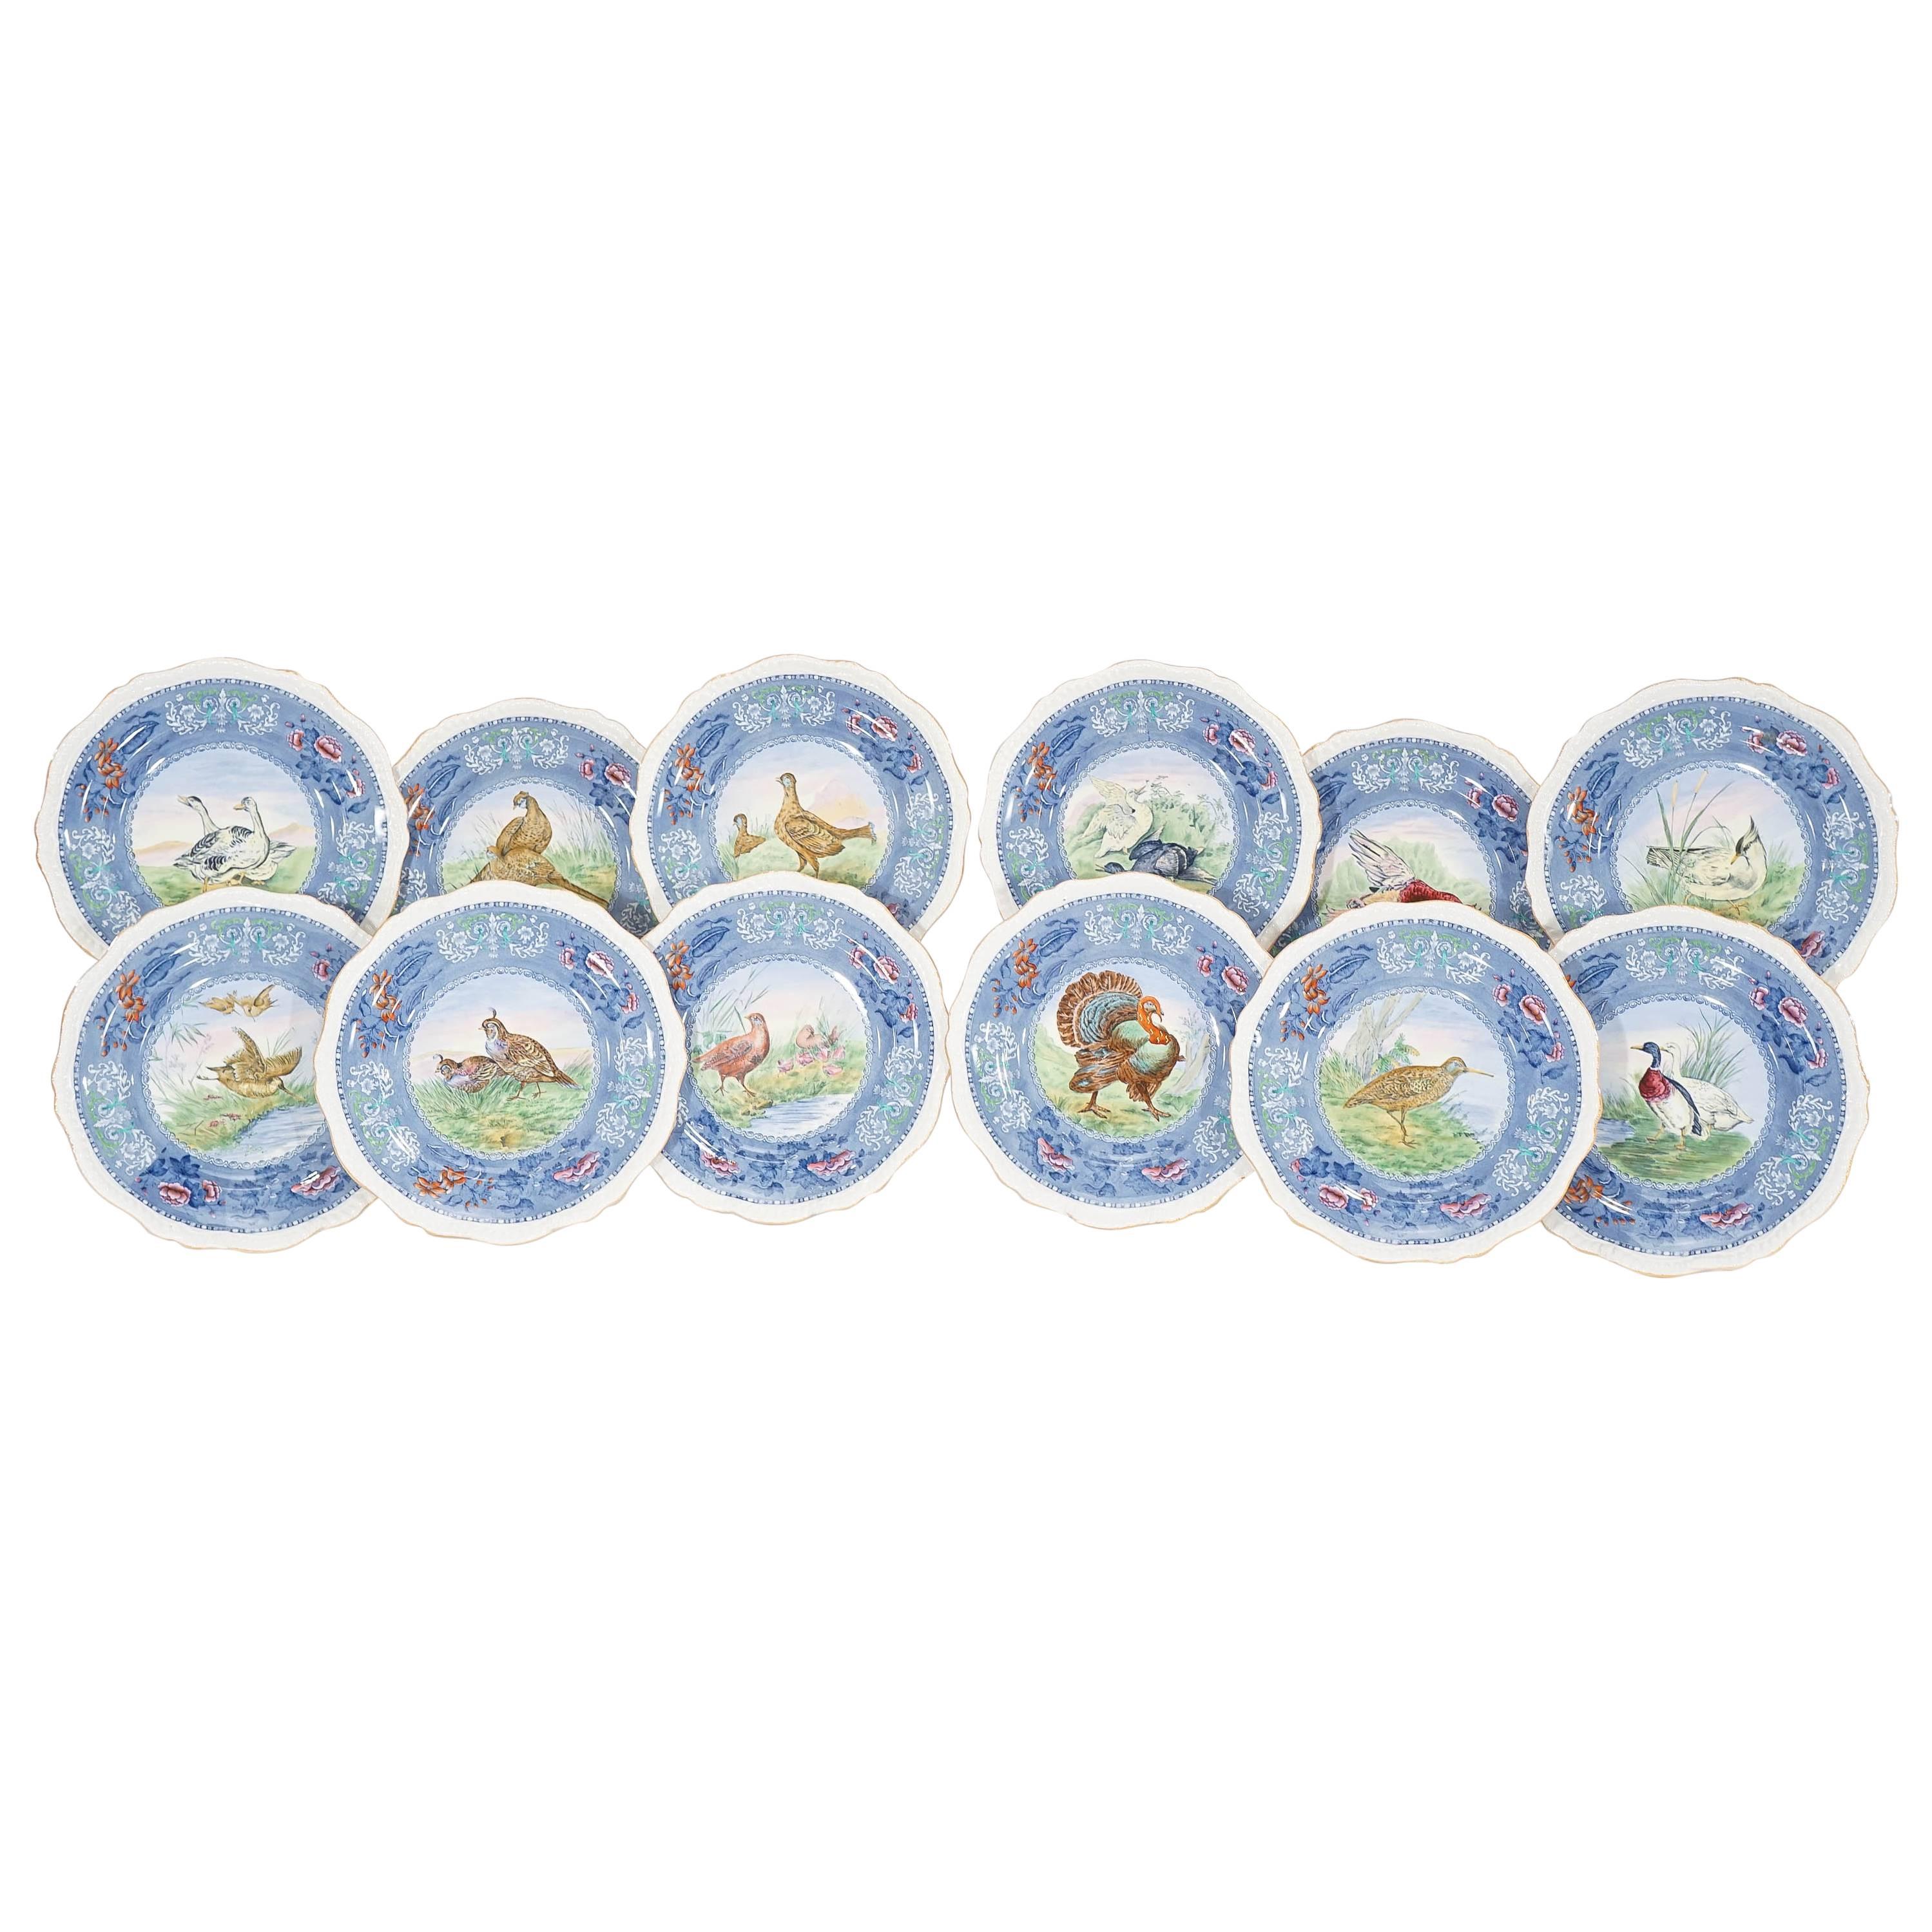 Set of 12 Copeland Spode Game Bird Dinner Plates with White Borders